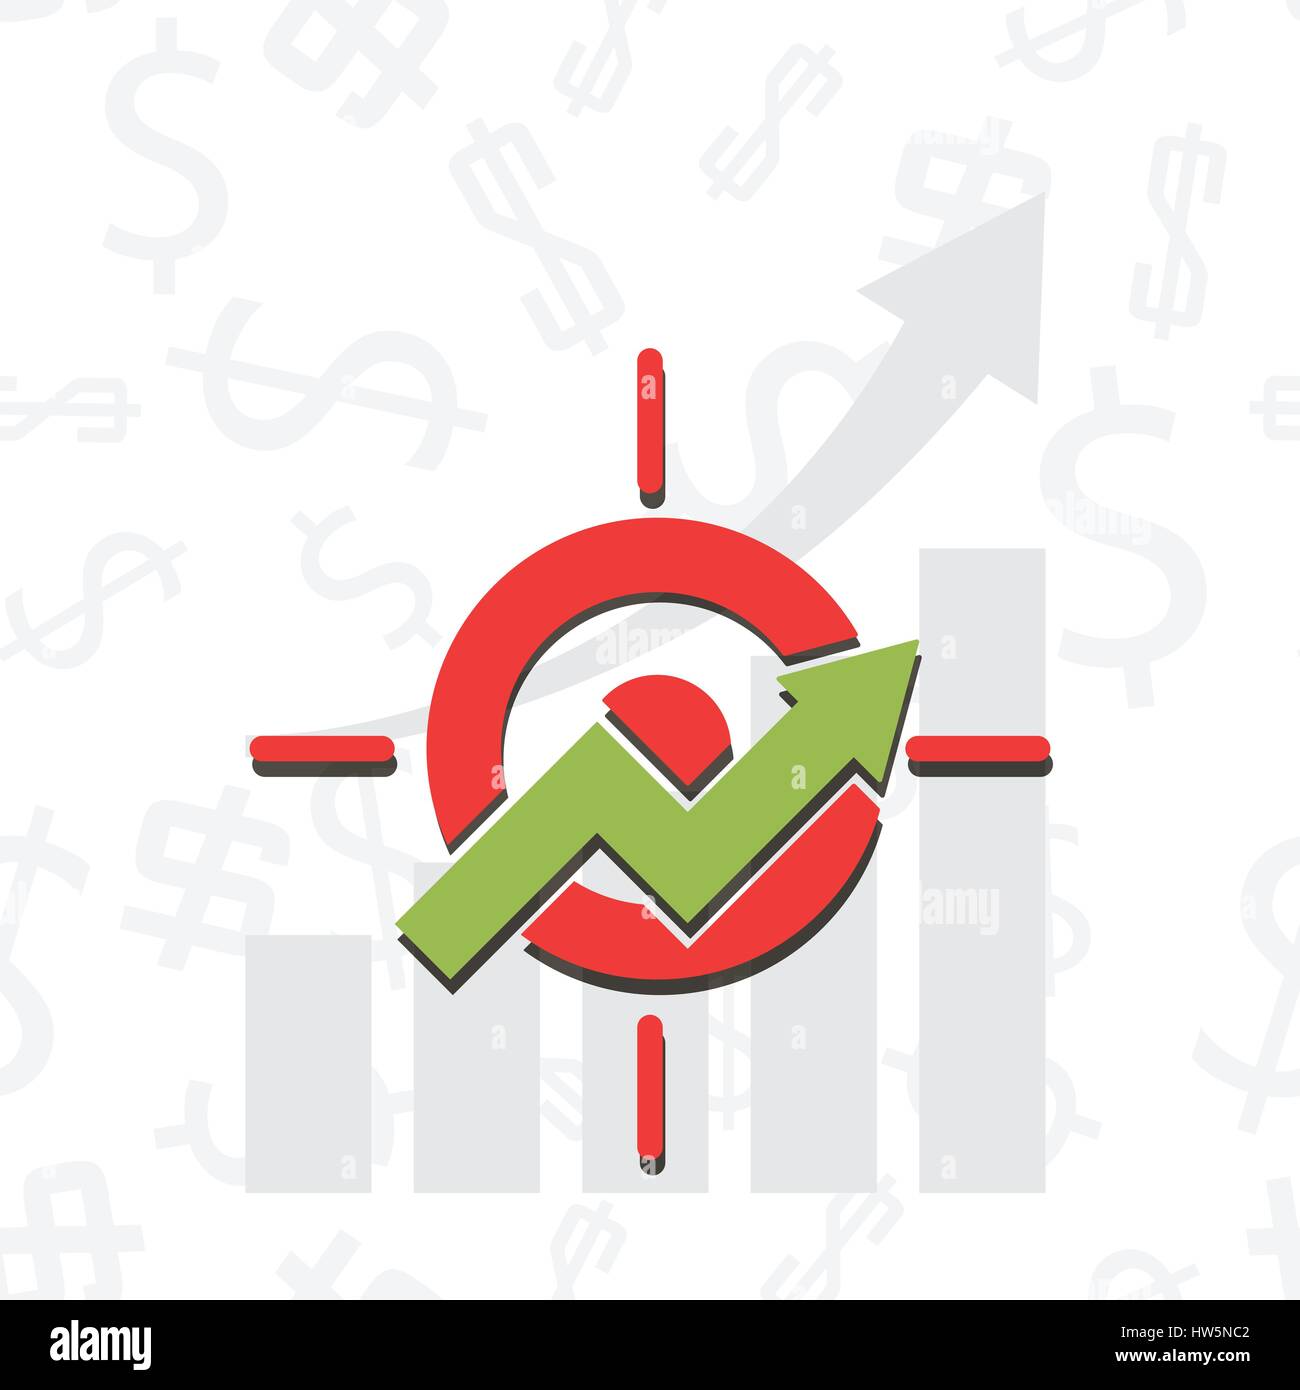 Upward chart with target symbol financial success abstract vector illustration. Business development strategy emblem. Investment efficiency concept. Stock Vector